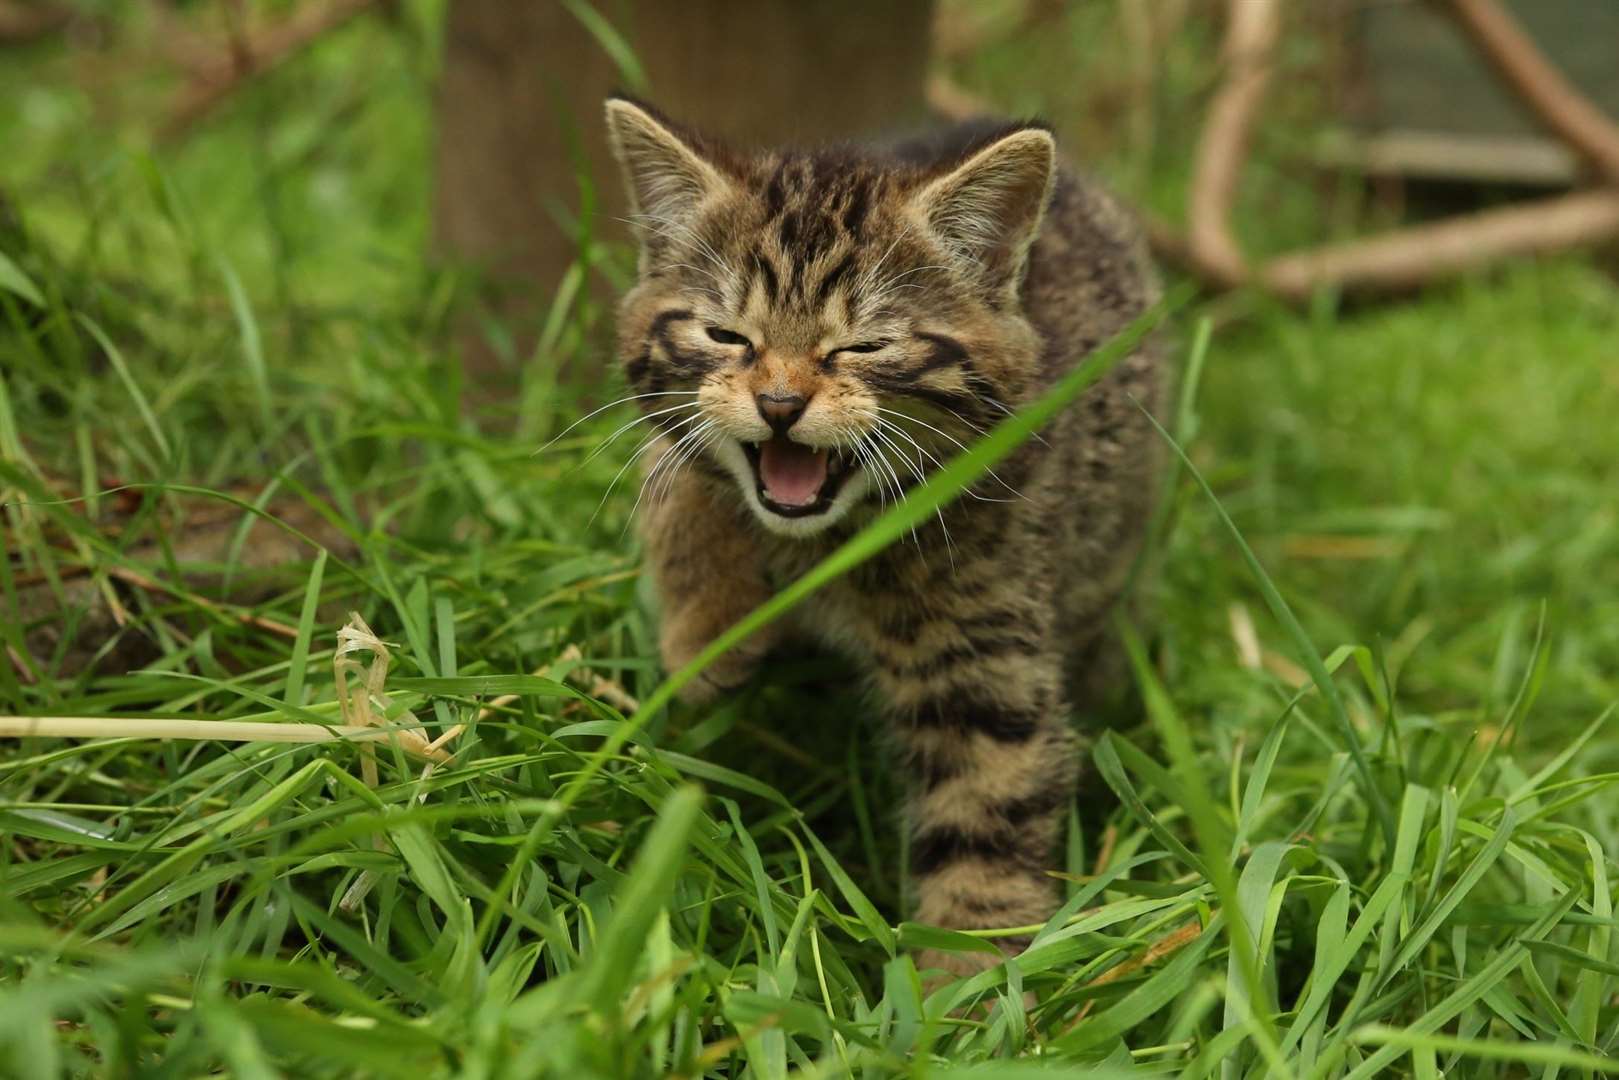 One of the wildcat kittens born at the Aigas Field Centre in Beauly.